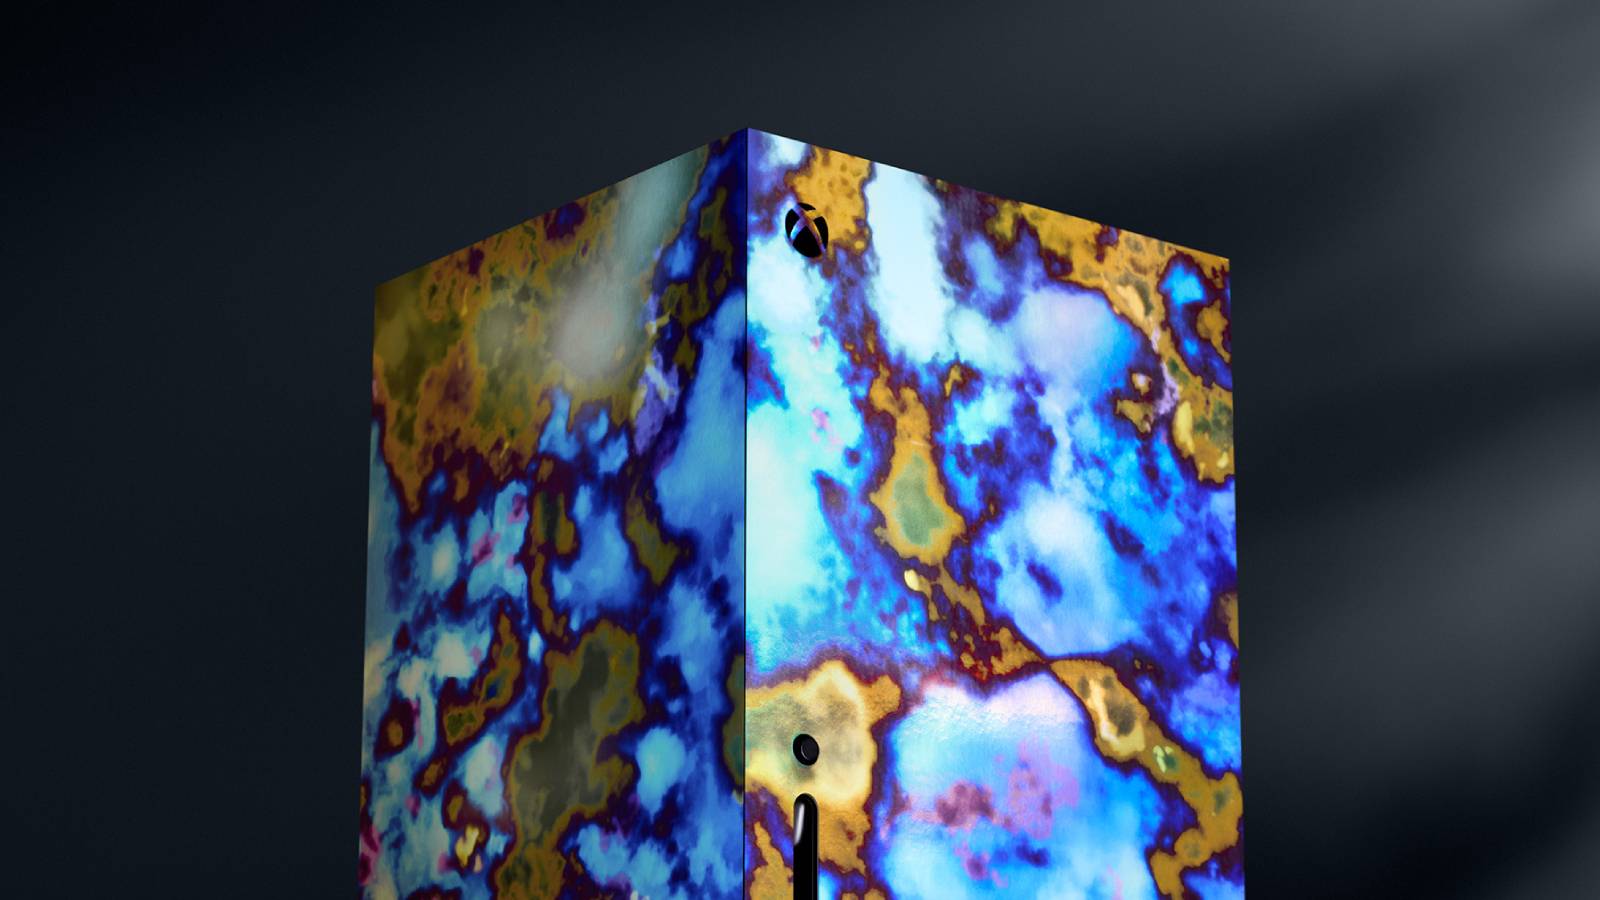 Promotional image of the Xbox Case Hardened skin by Dbrand.